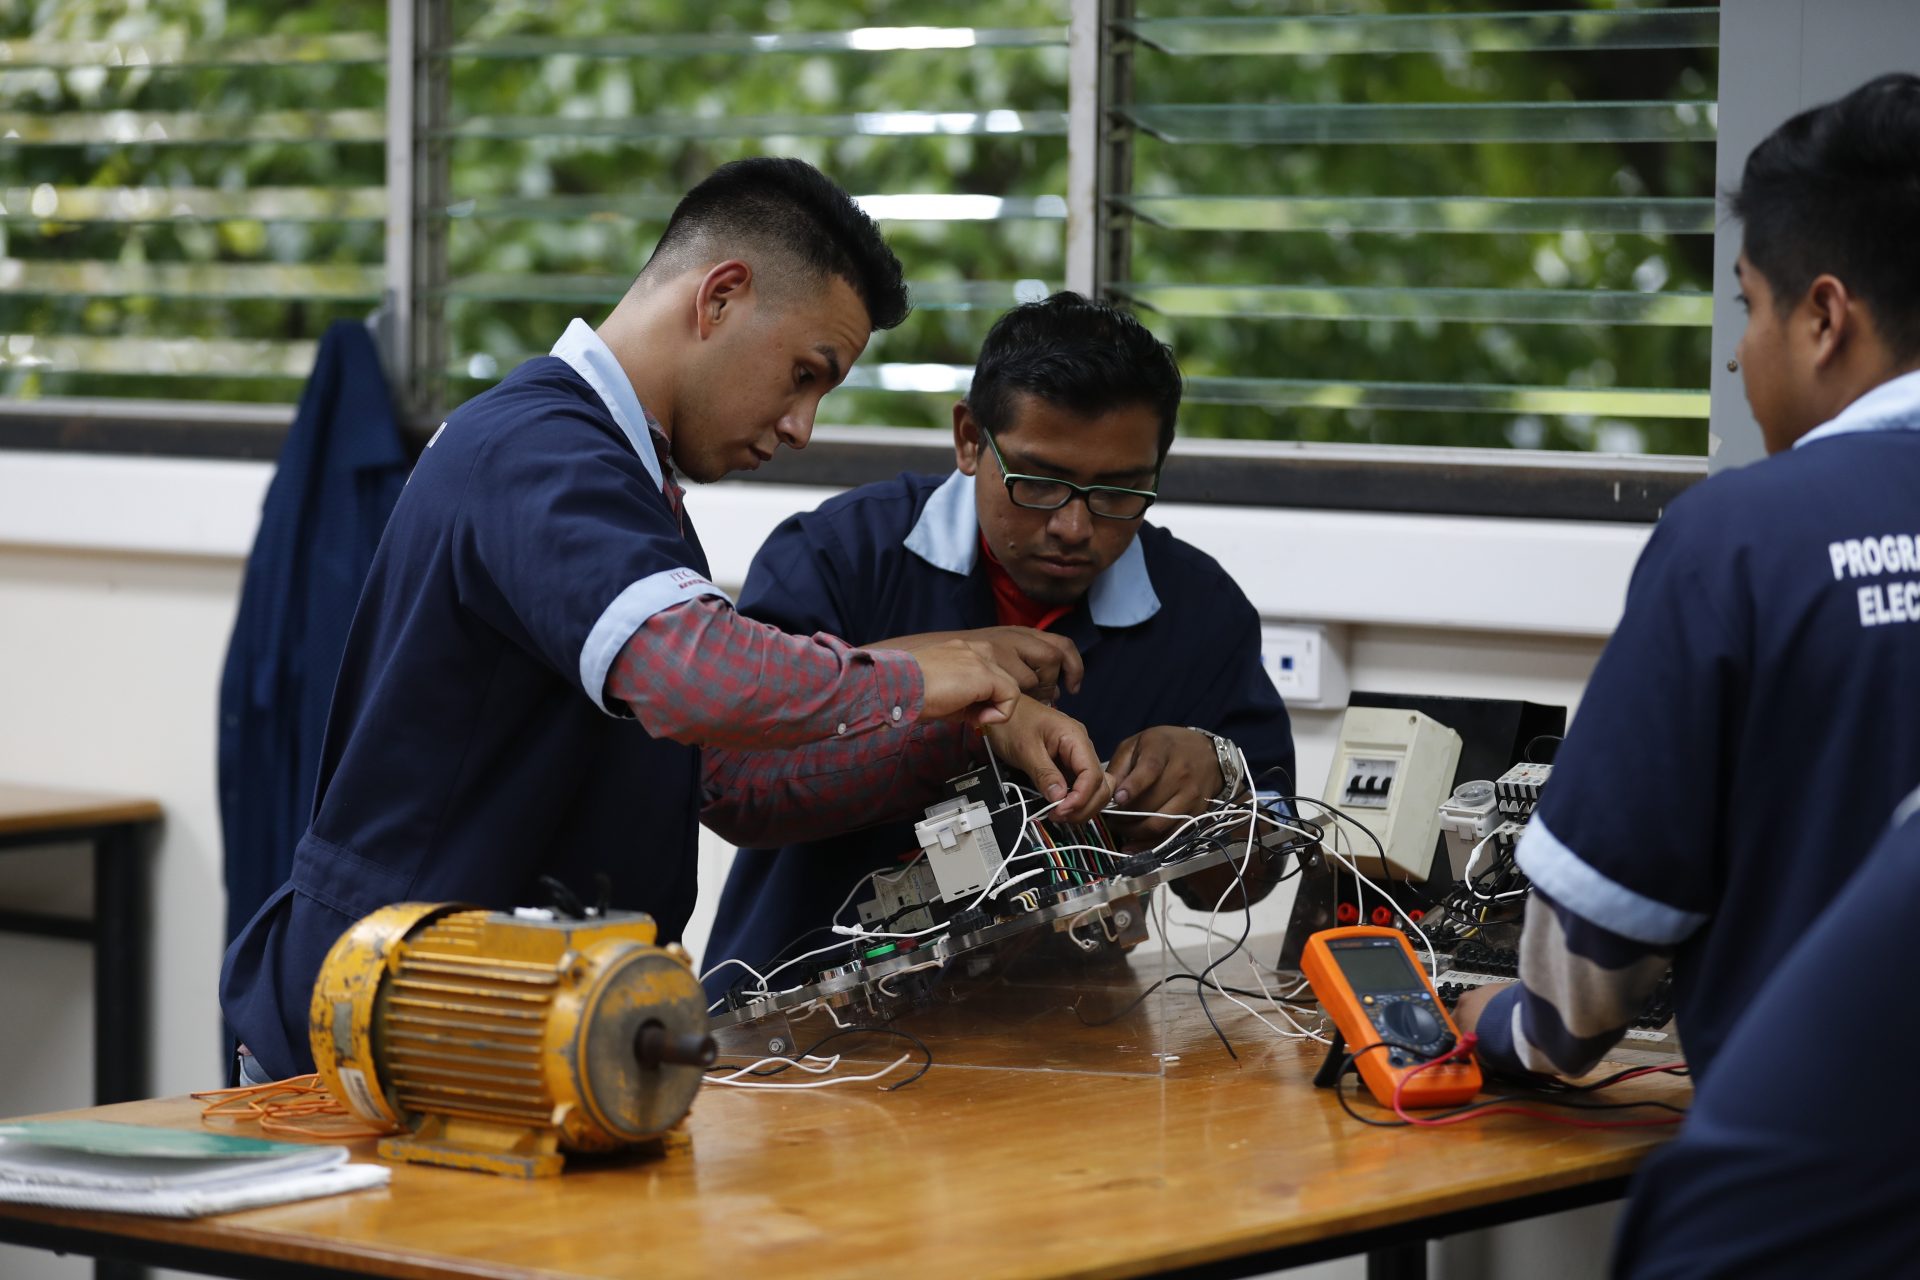 In this Oct. 11, 2019, photo, José Fernando Guillén Rodríguez, 21, left, practices building circuits with other students around a workbench in San Salvador, El Salvador. "I don't think about migrating anymore," said Guillén Rodríguez, 21, who was apprehended in the U.S. at 18 and spent time in adult detention before being deported. Now he's completed a year of daily electrical classes and works as an apprentice at an electrical construction company.